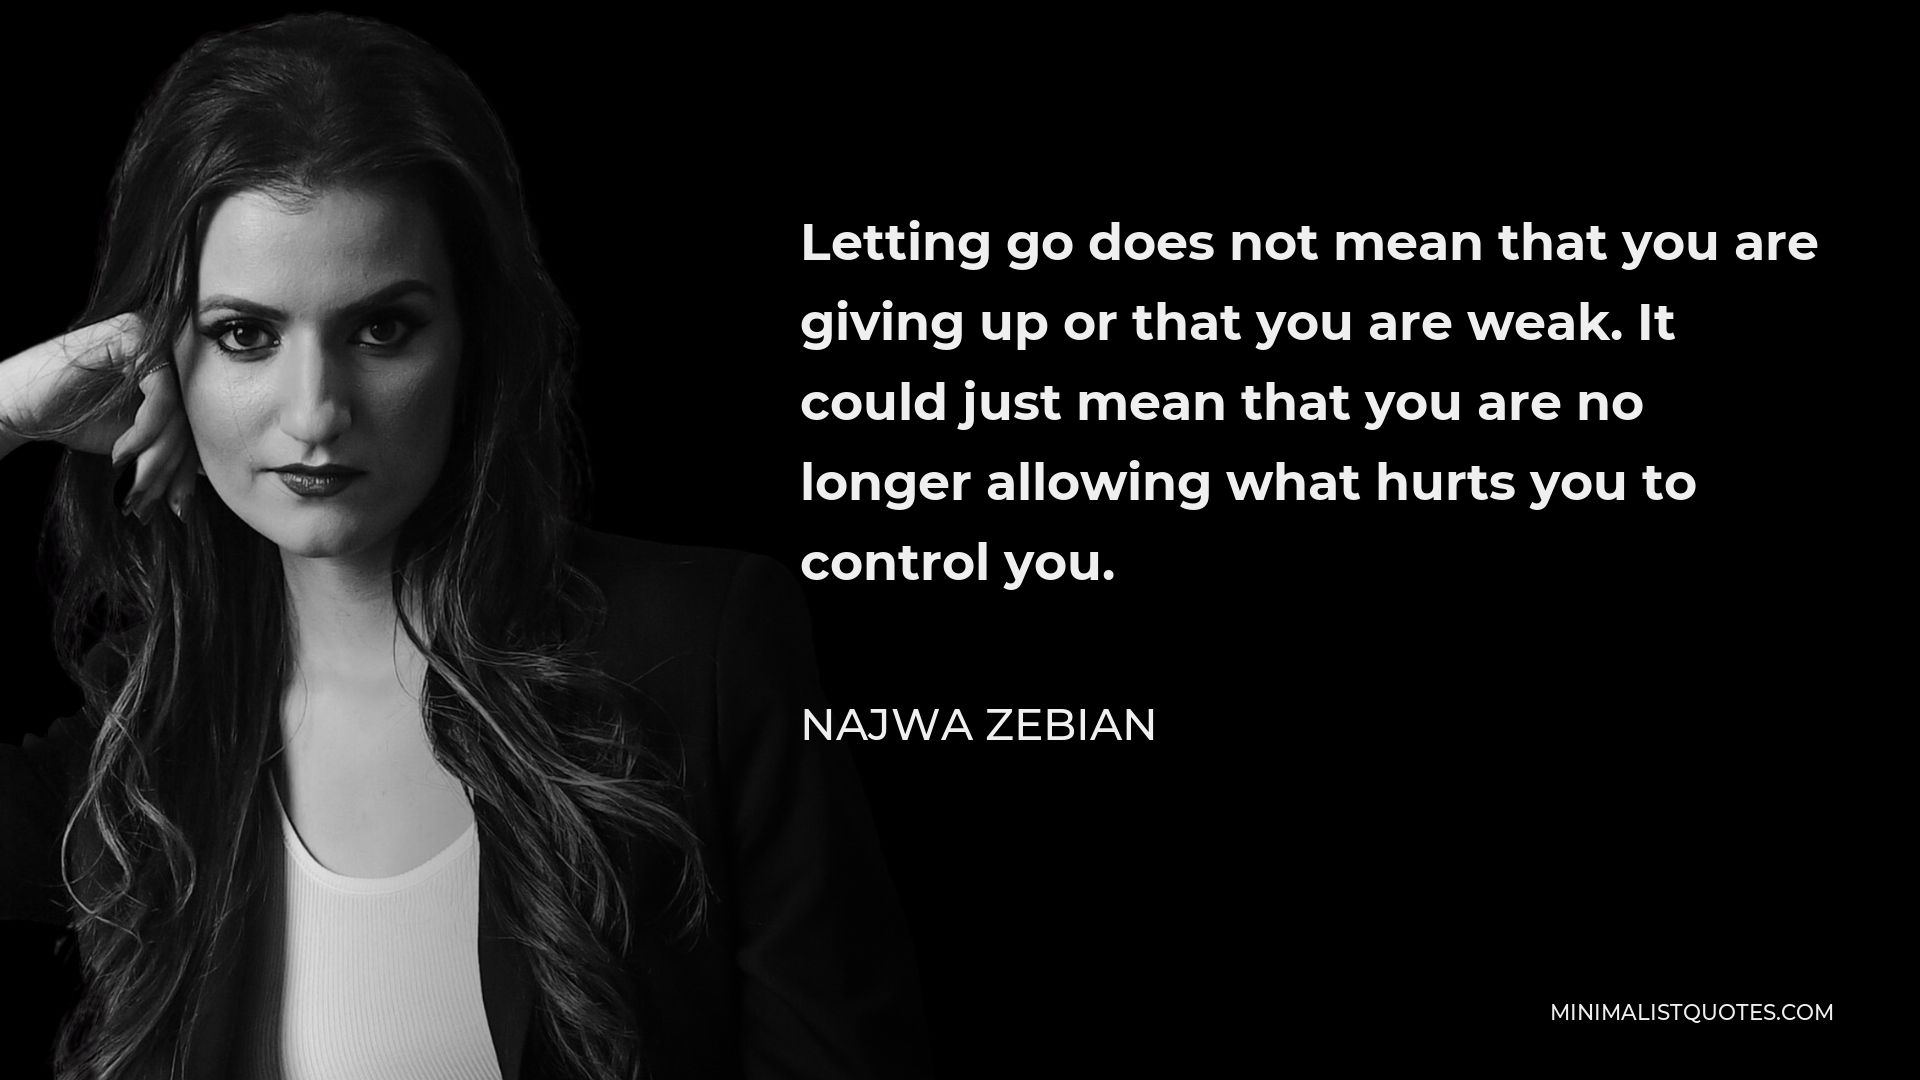 Najwa Zebian Quote - Letting go does not mean that you are giving up or that you are weak. It could just mean that you are no longer allowing what hurts you to control you.